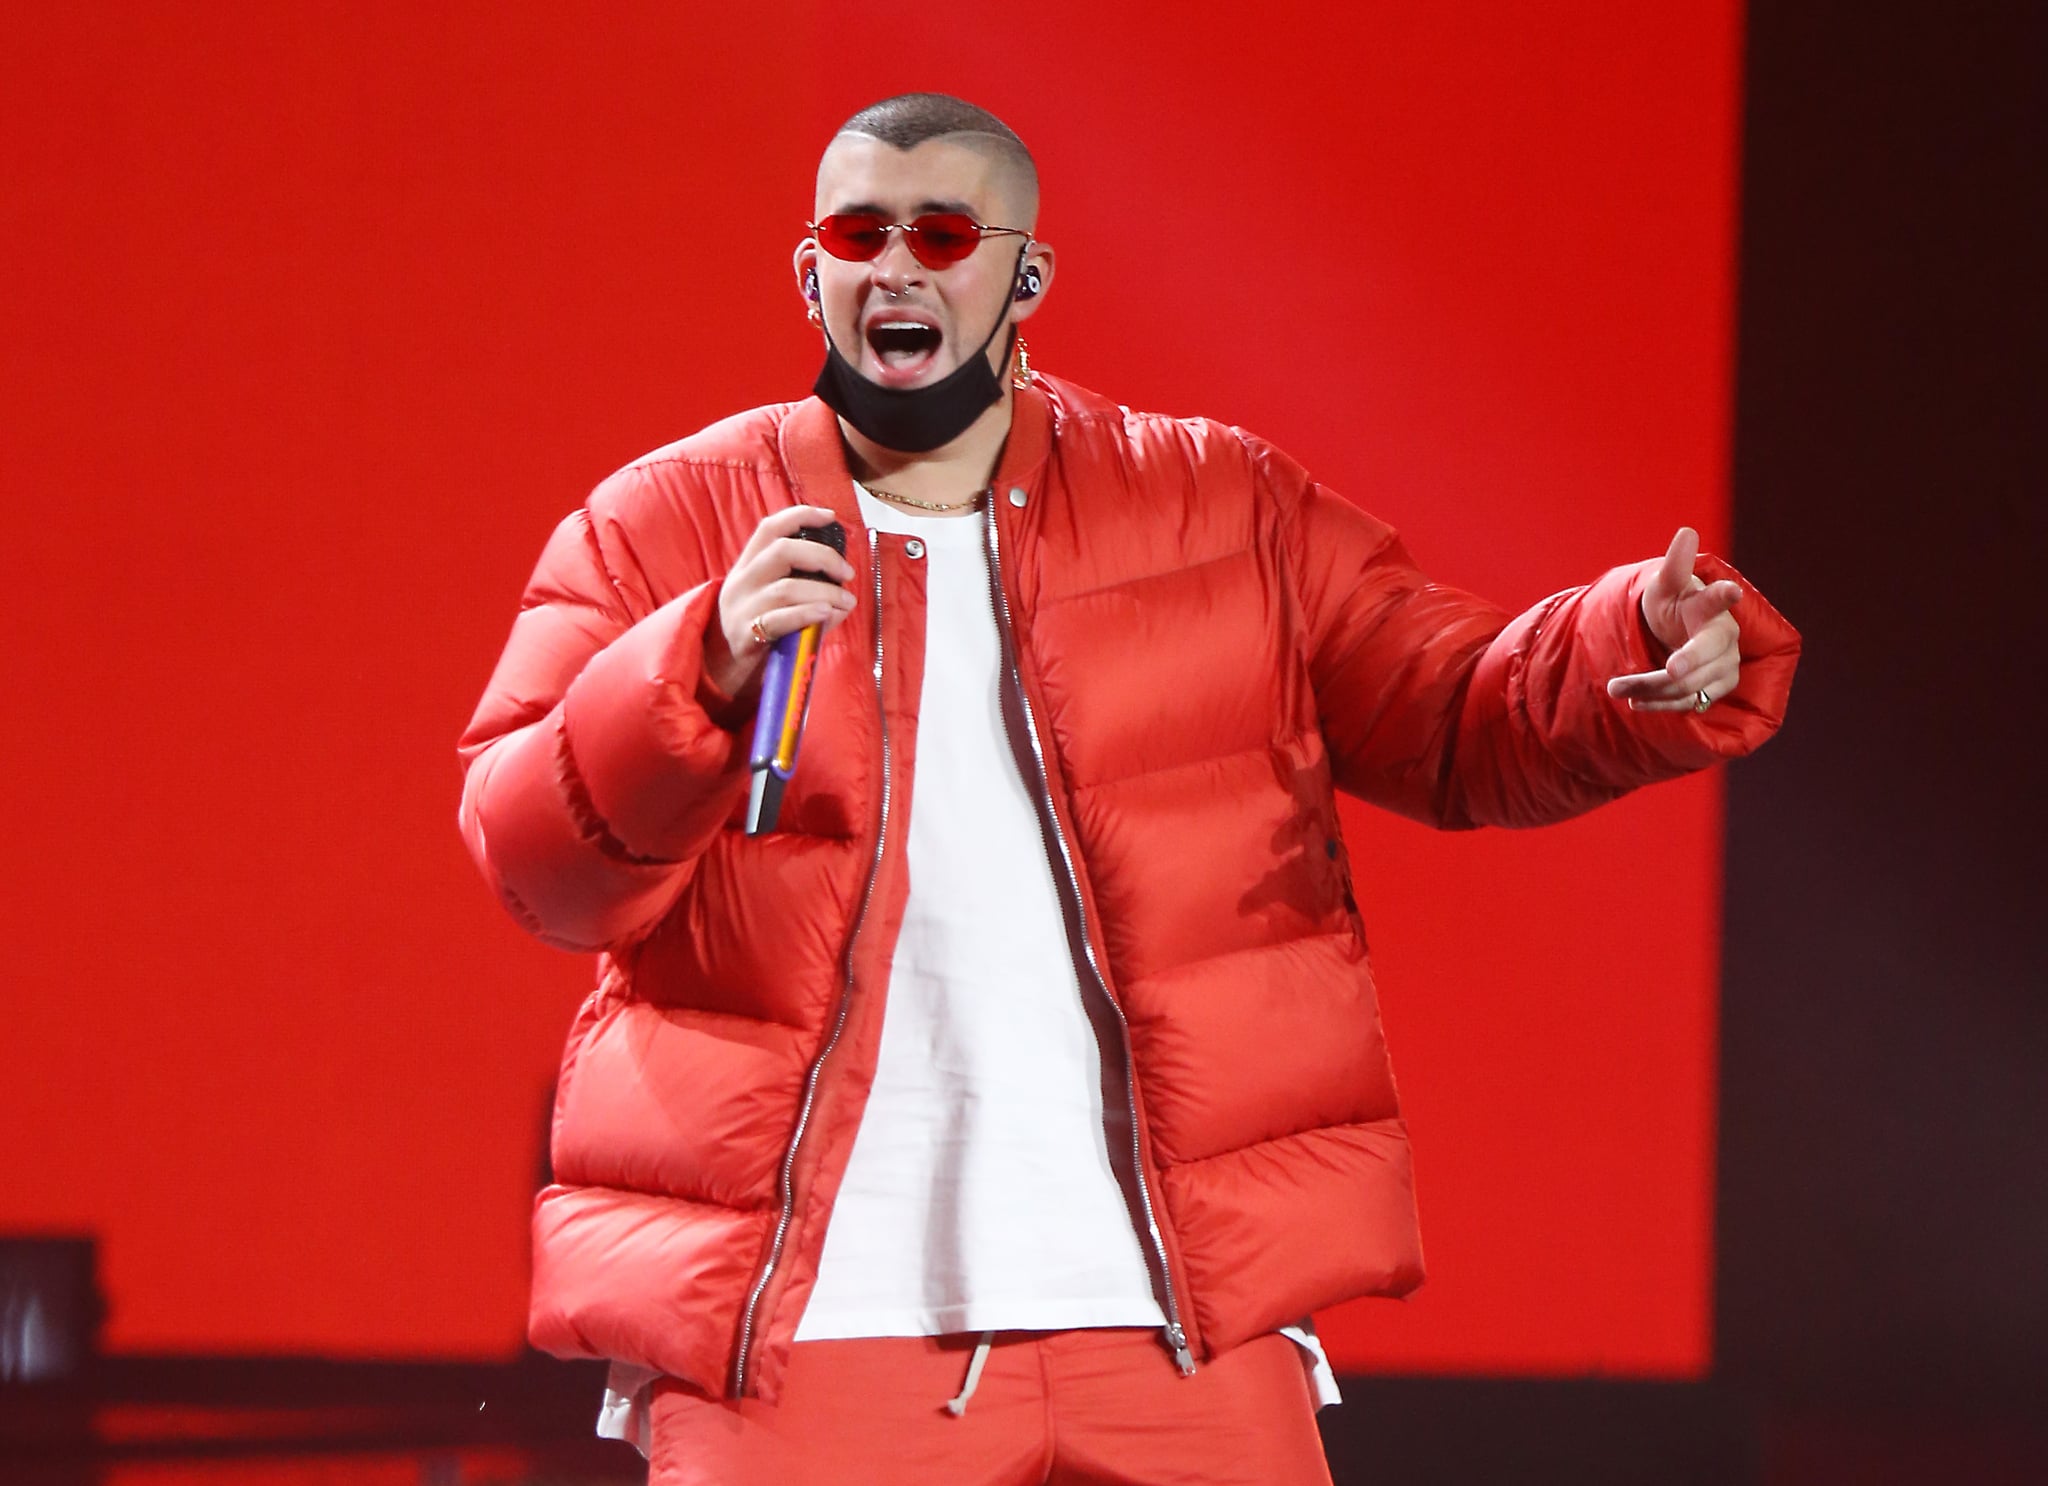 LAS VEGAS, NEVADA - NOVEMBER 14: Bad Bunny performs onstage during the 20th Annual Latin GRAMMY Awards held at MGM Grand Garden Arena on November 14, 2019 in Las Vegas, Nevada. (Photo by Michael Tran/FilmMagic)